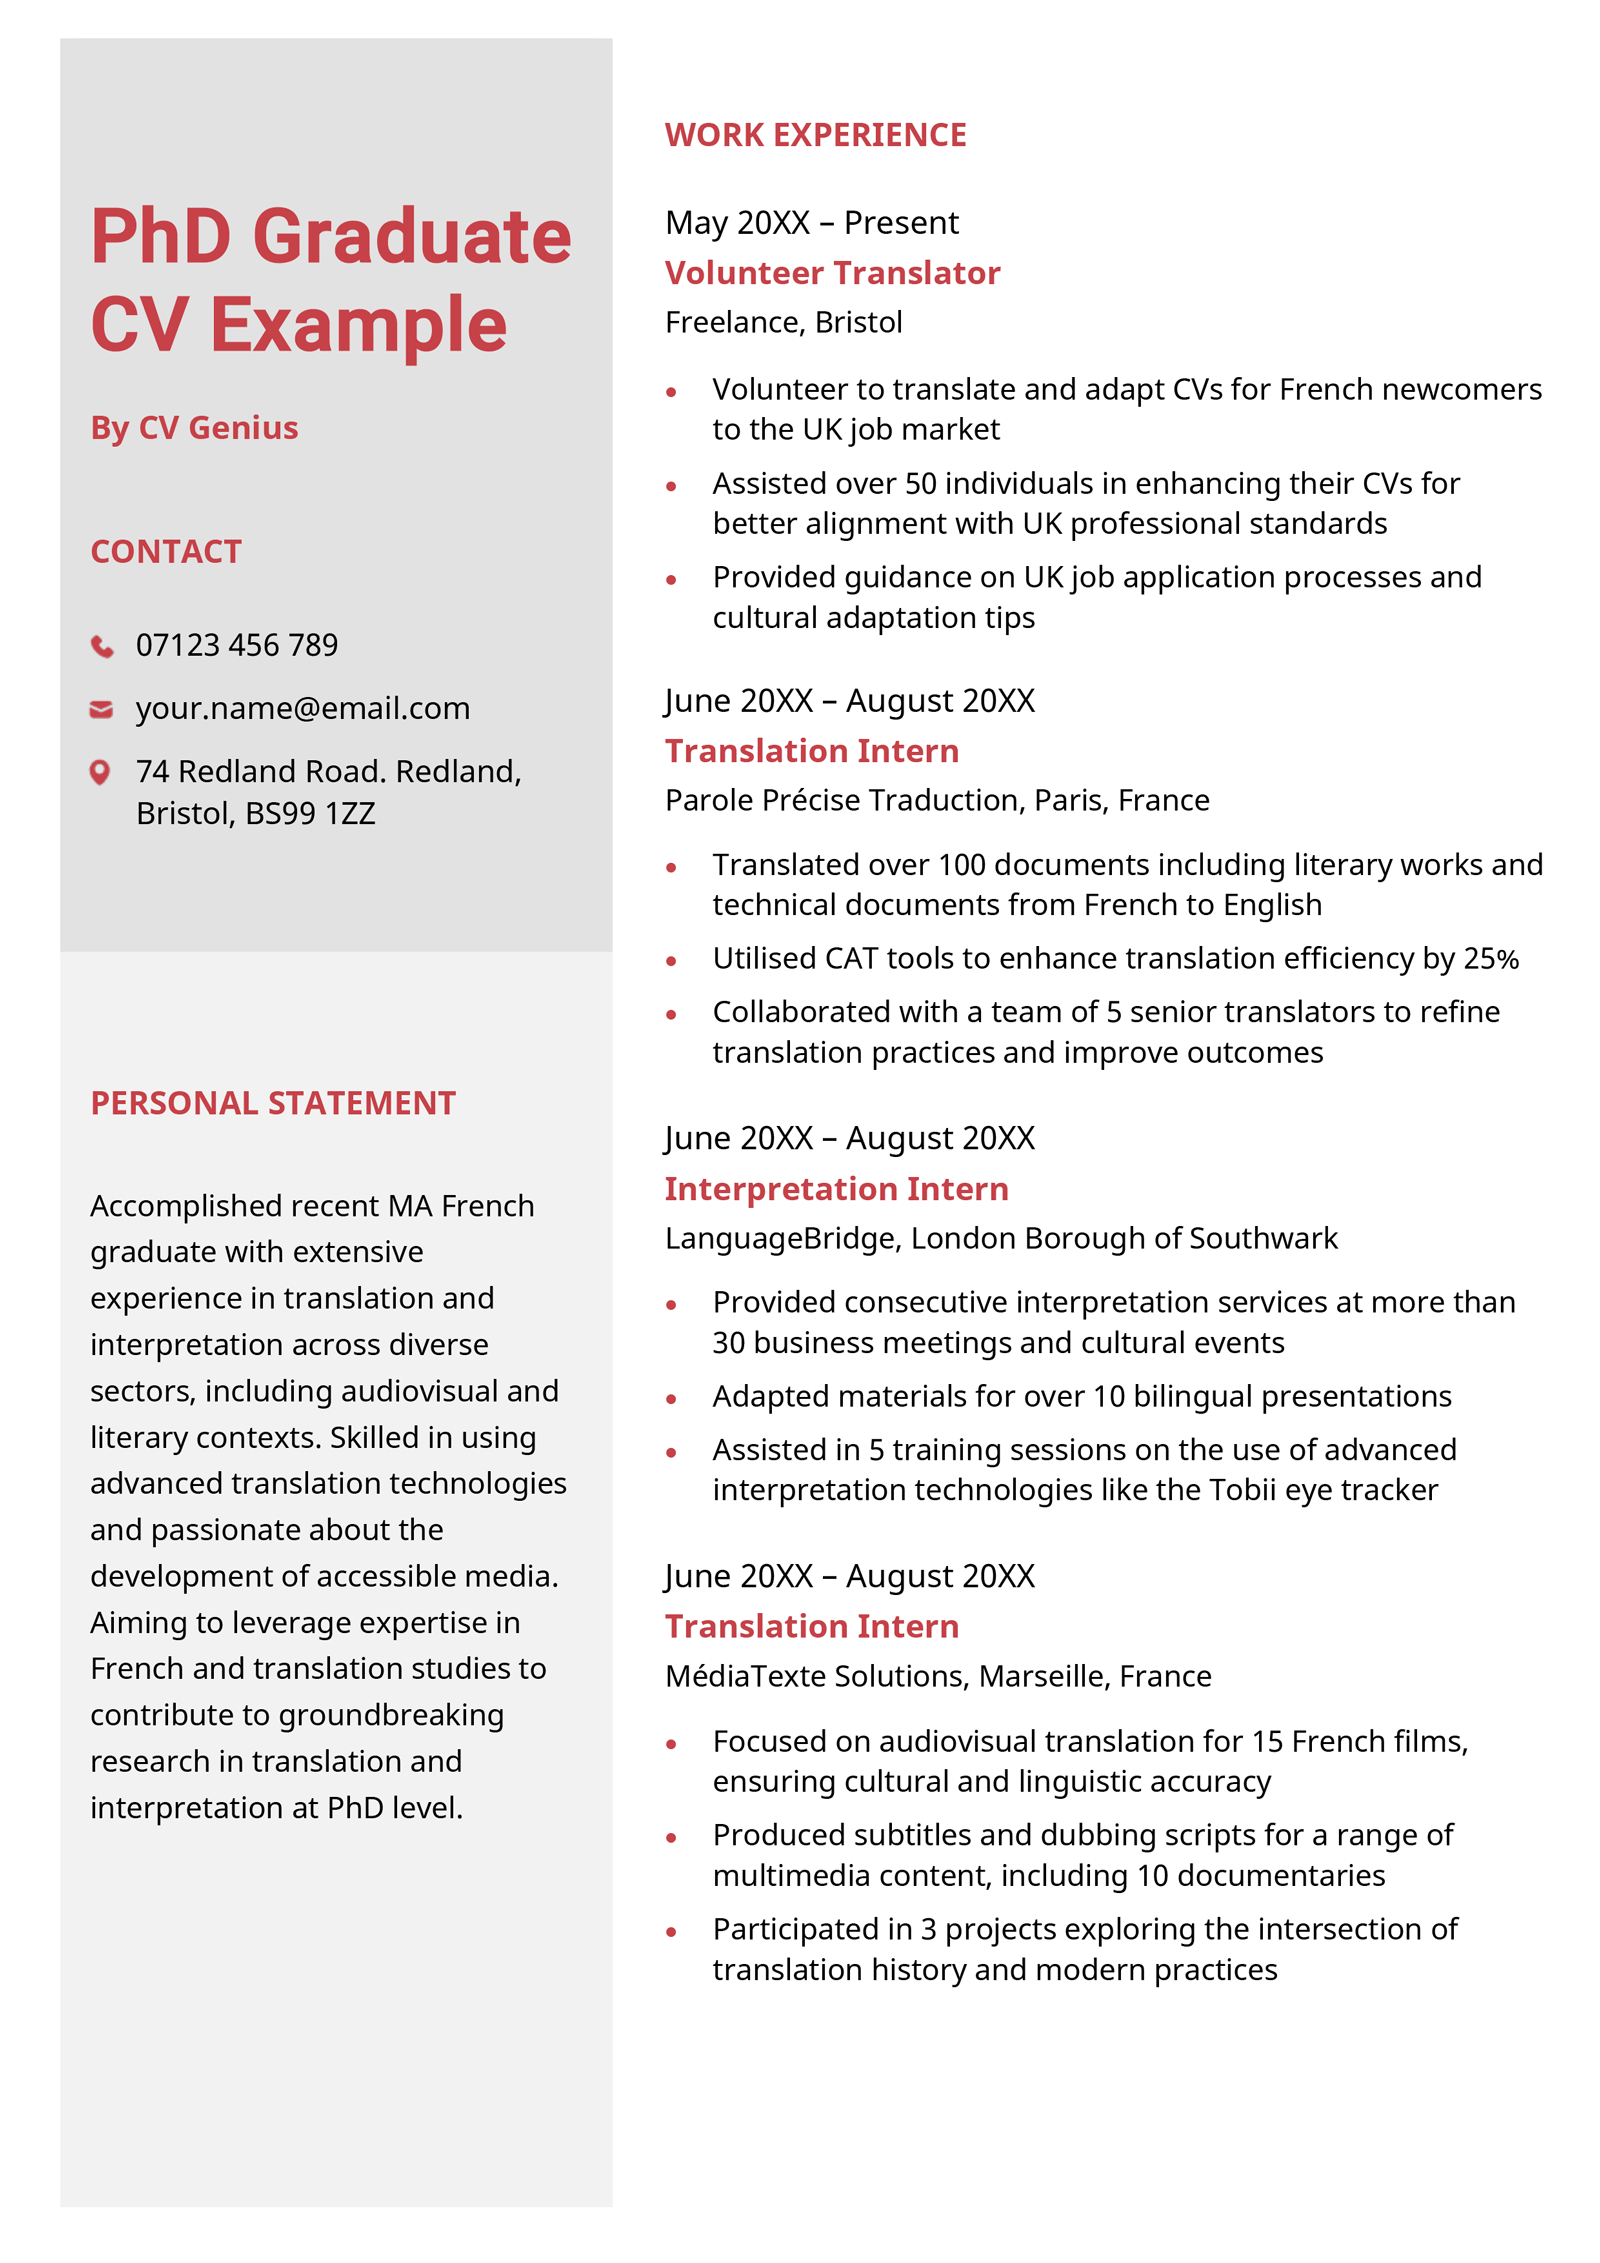 A PhD graduate CV sample that uses a unique three-colour, two-column design to convey the applicant's fit for the role.